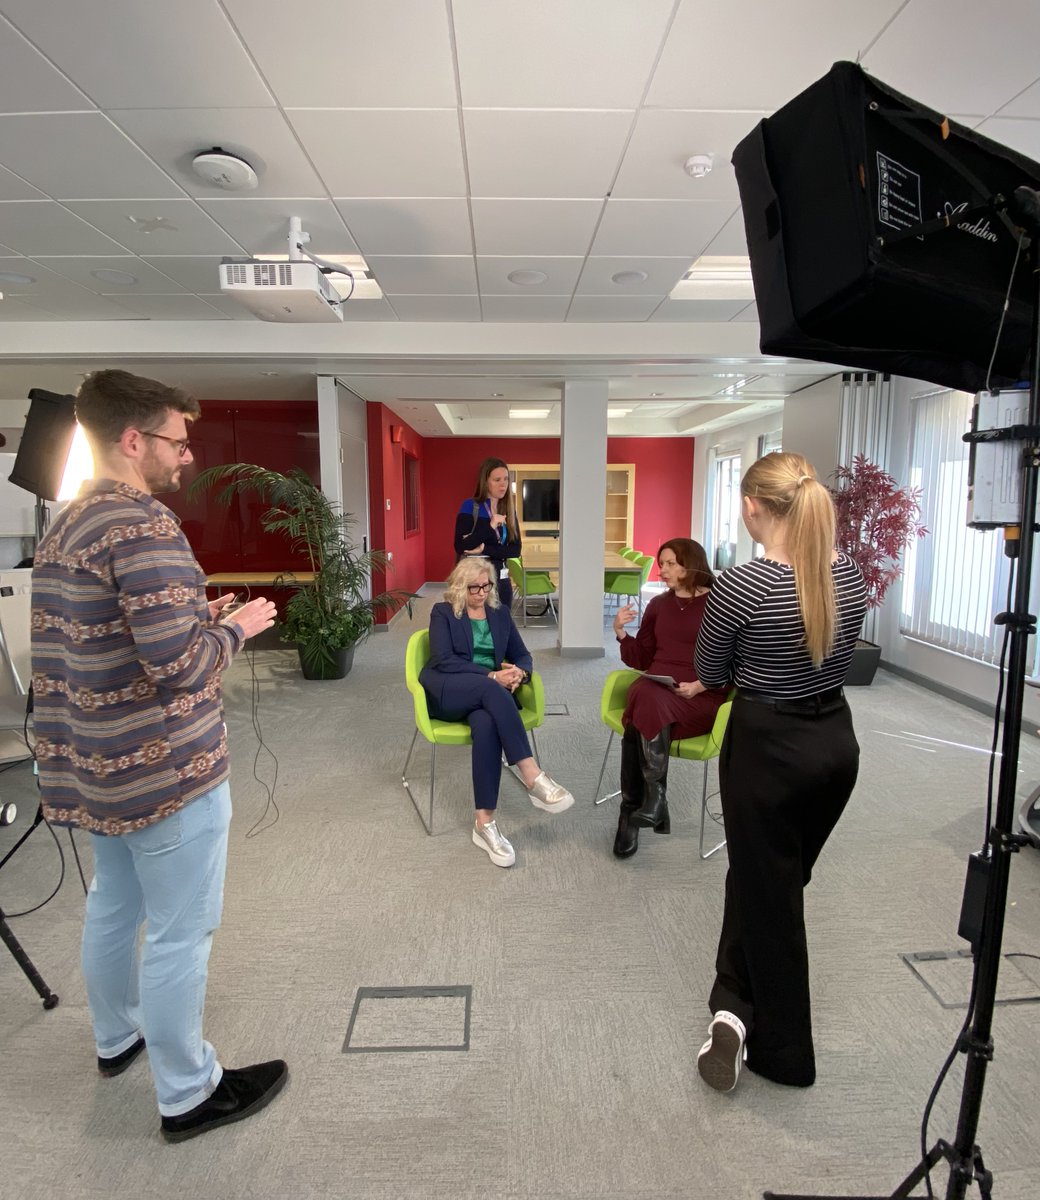 Our colleagues were thrust into the spotlight 📸 Thank you @Millstreamprod for capturing our Research and Innovation activities. Thanks to our staff, we are ranked 3rd for research power in the UK. More on R&I: port.ac.uk/research #Research #BTS